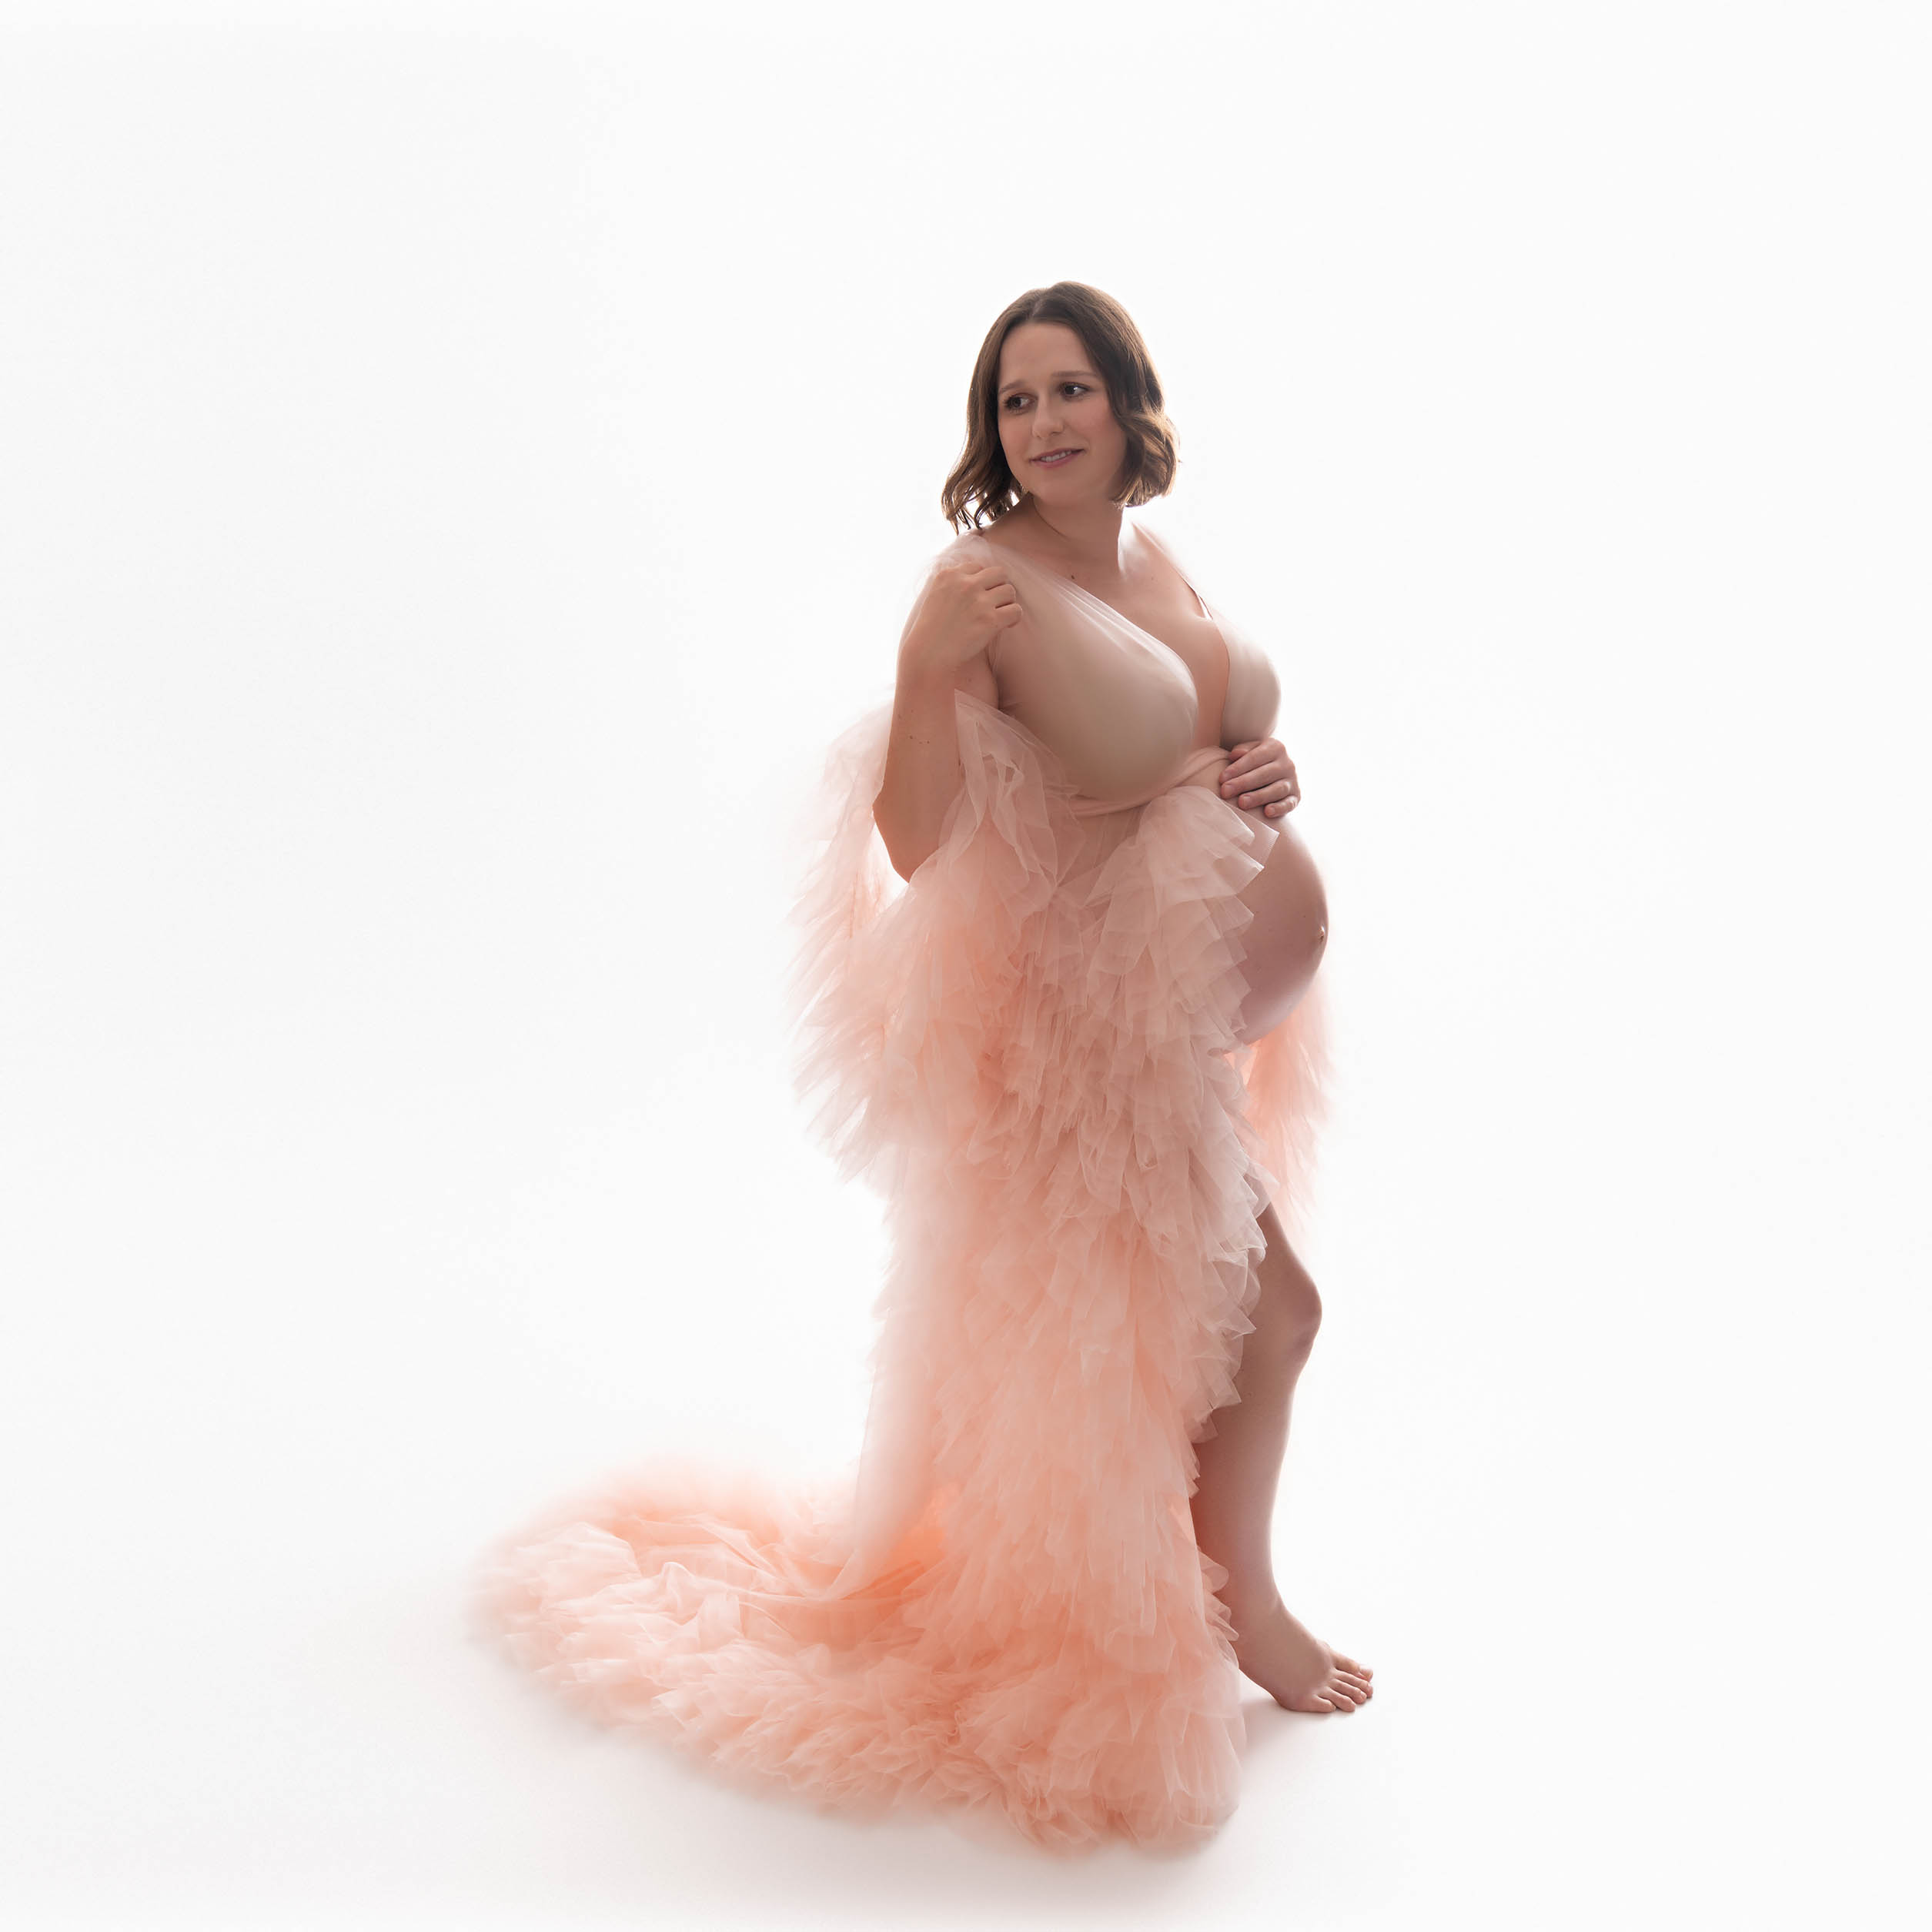 A pregnant Orange County woman is wearing a ruffled, pink maternity gown.